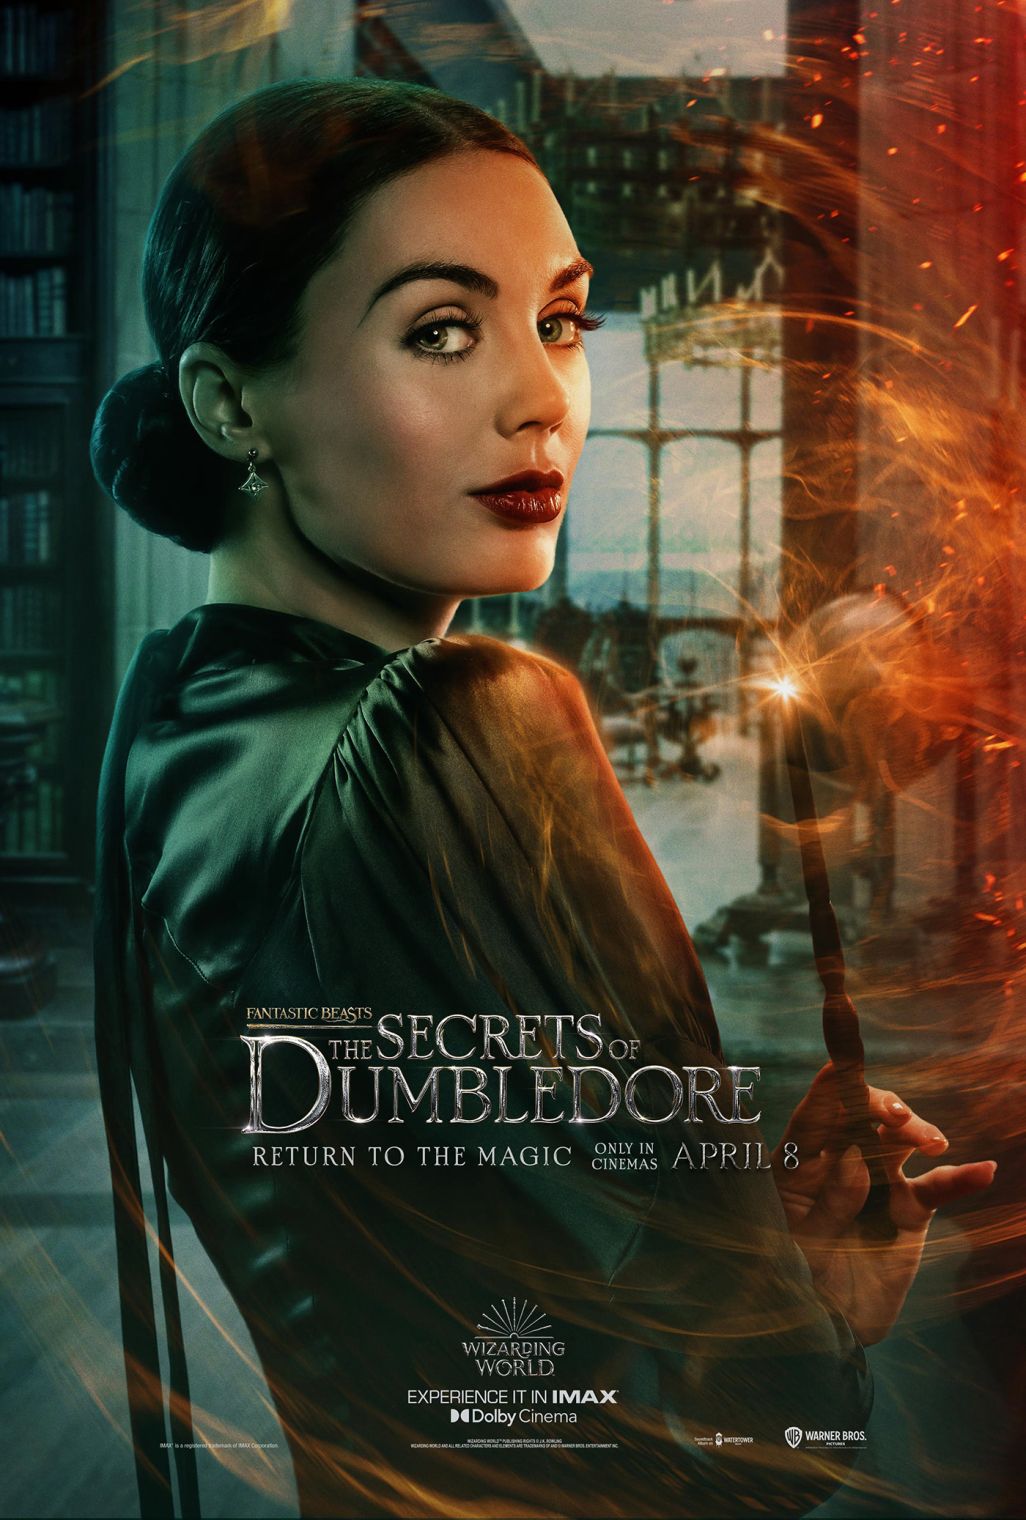 Warner Bros have released a new trailer for Fantastic Beasts: The Secrets of Dumbledore, with Poppy Corby-Tuech returning as Vinda Rossier